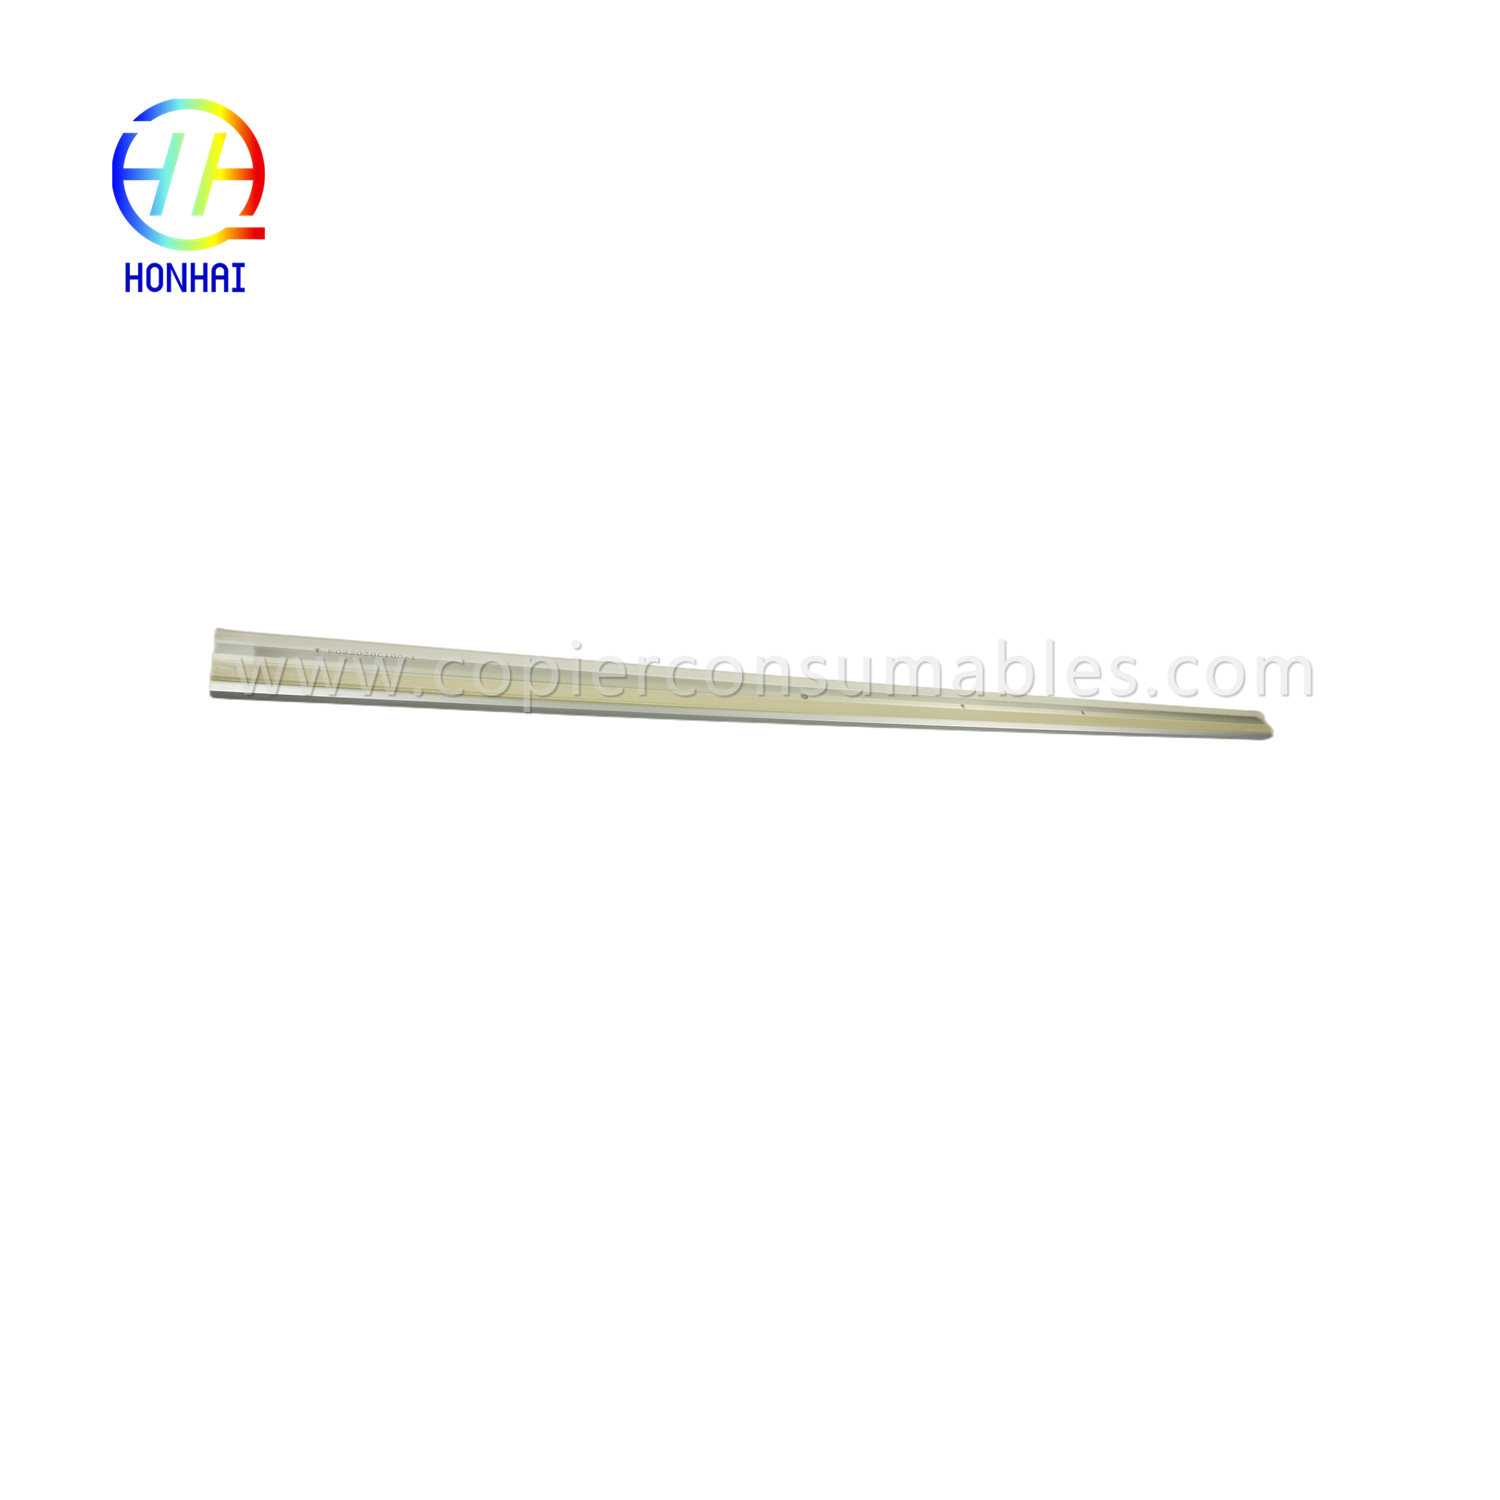 Cleaning Blade for Oce 9300 9400 9600 TDS300 400 600 700 Pw300 340 360 365 (PN. 2912651) (3)